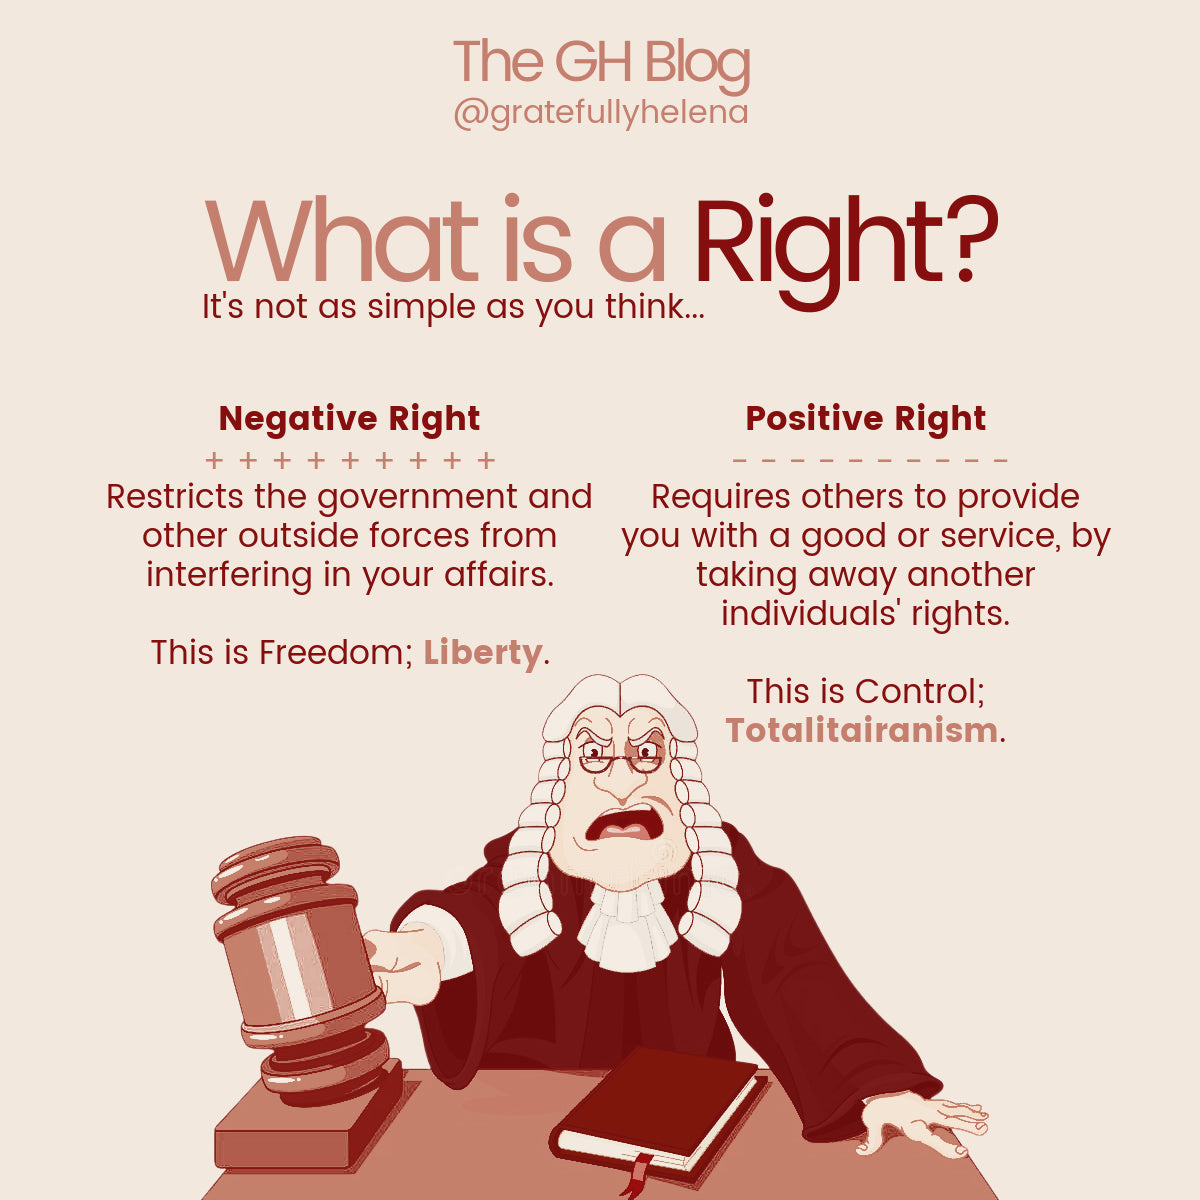 What is a Right?